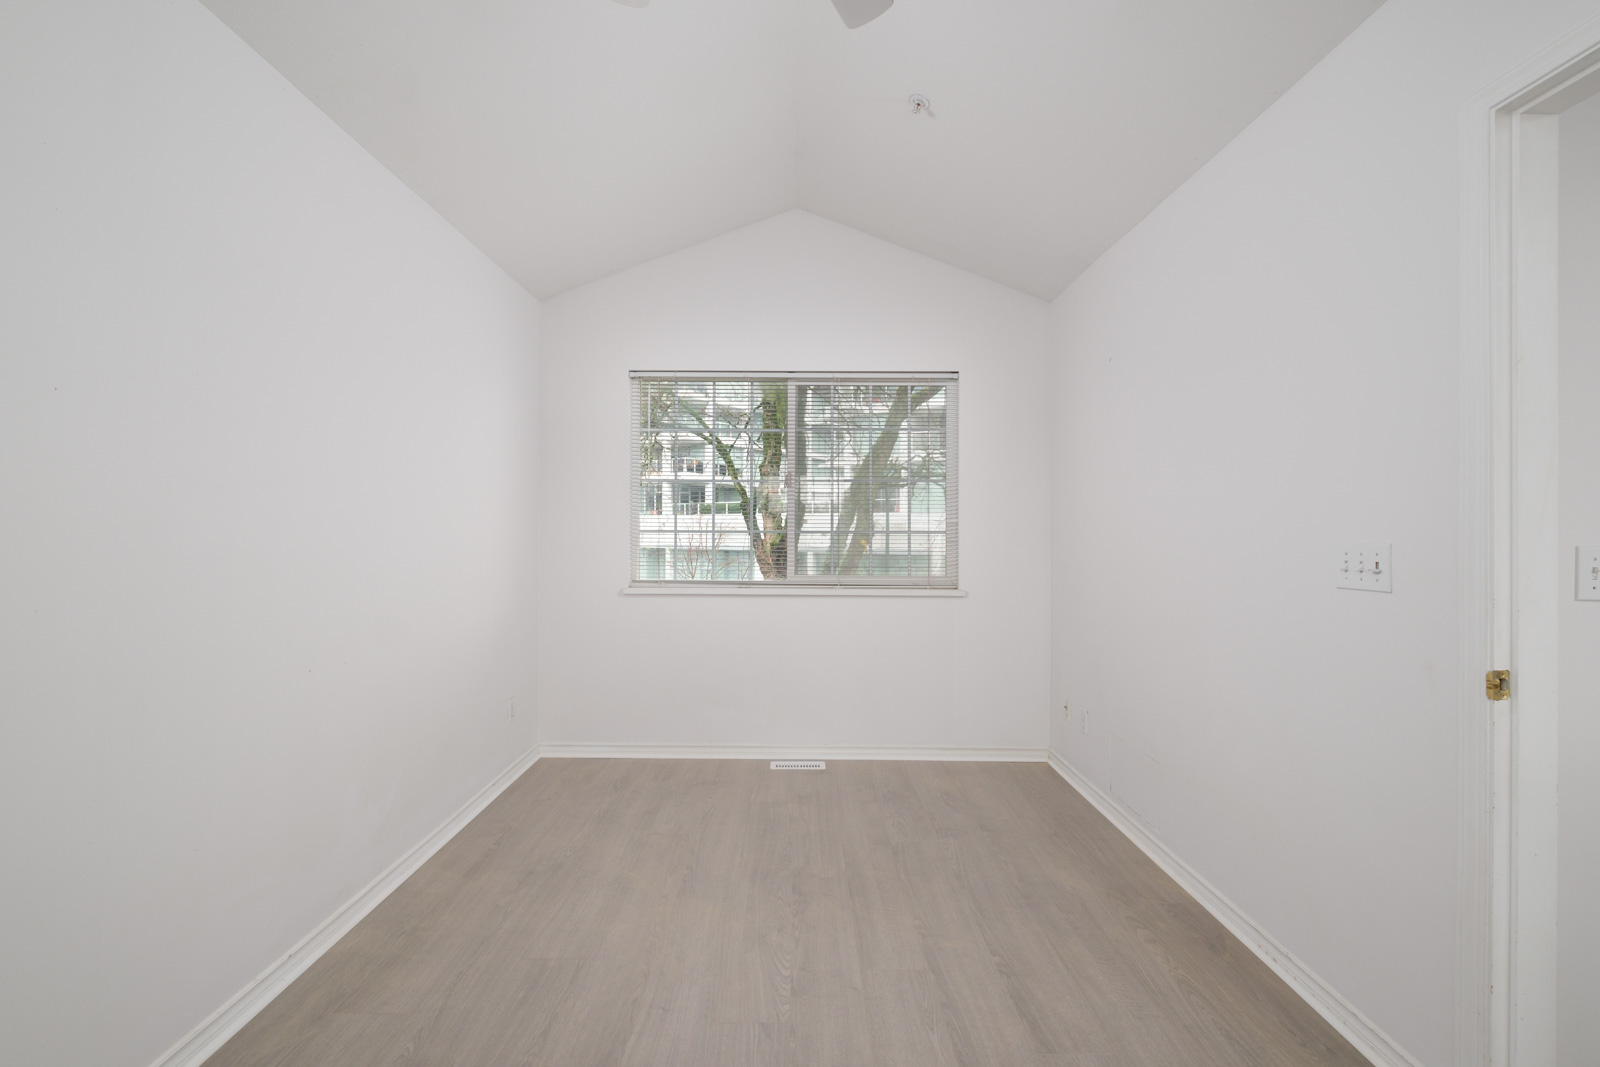 room with hardwood floors and window in background with view of tree in rental house managed by birds nest properties